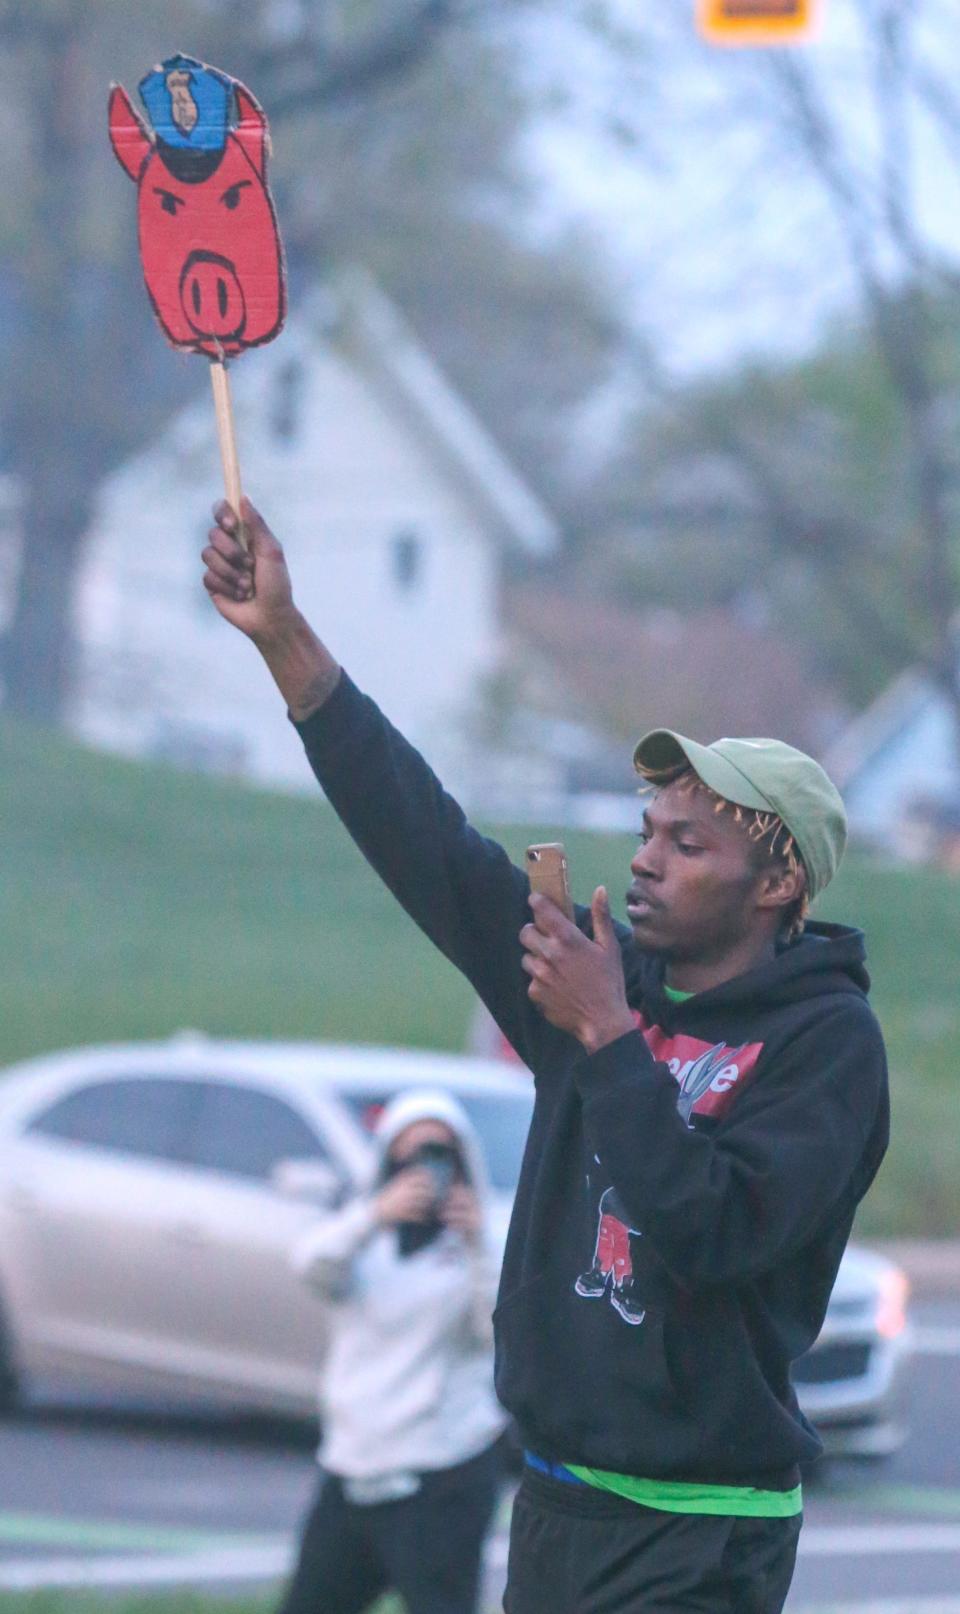 A protester holds a sign during an April 19 protest on Copley Road in which police and deputies deployed pepper spray and tear gas to disperse the crowd.